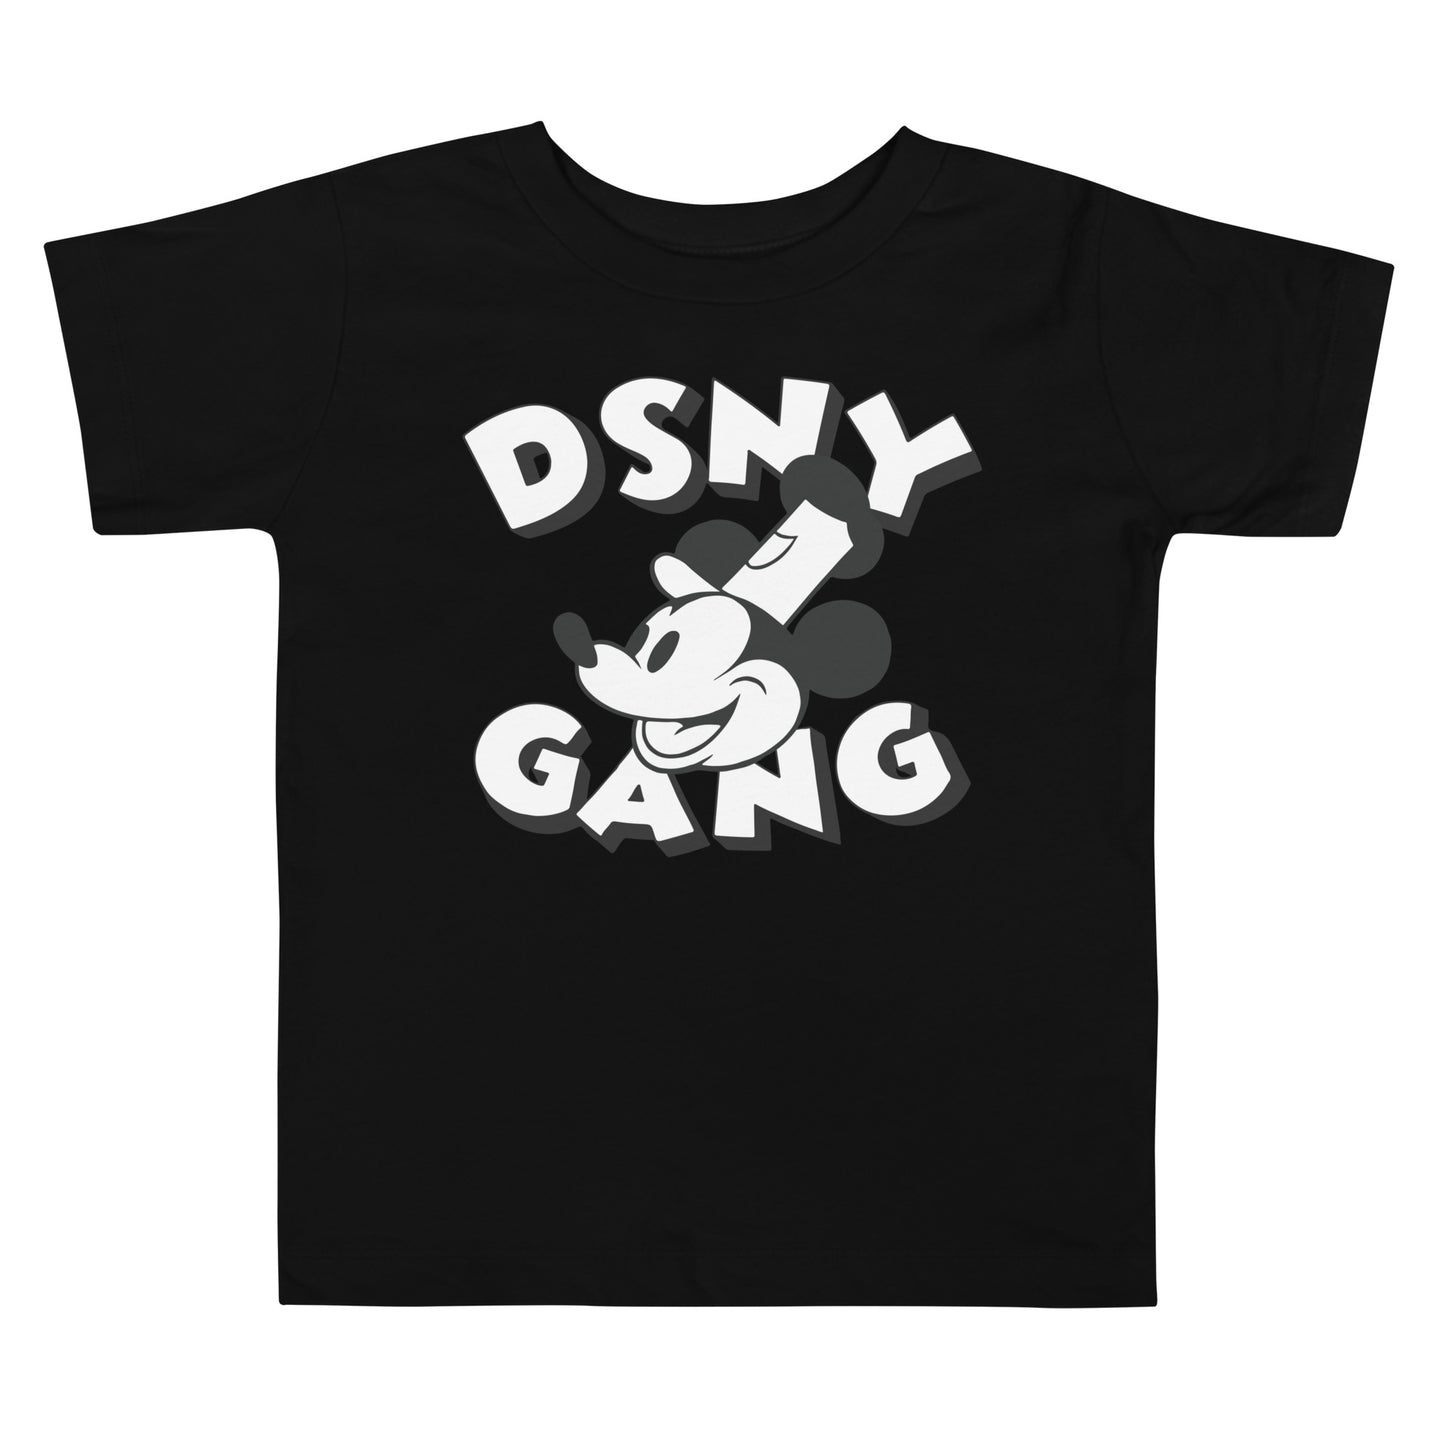 DSNY GANG Steamboat Willie Toddler Tee